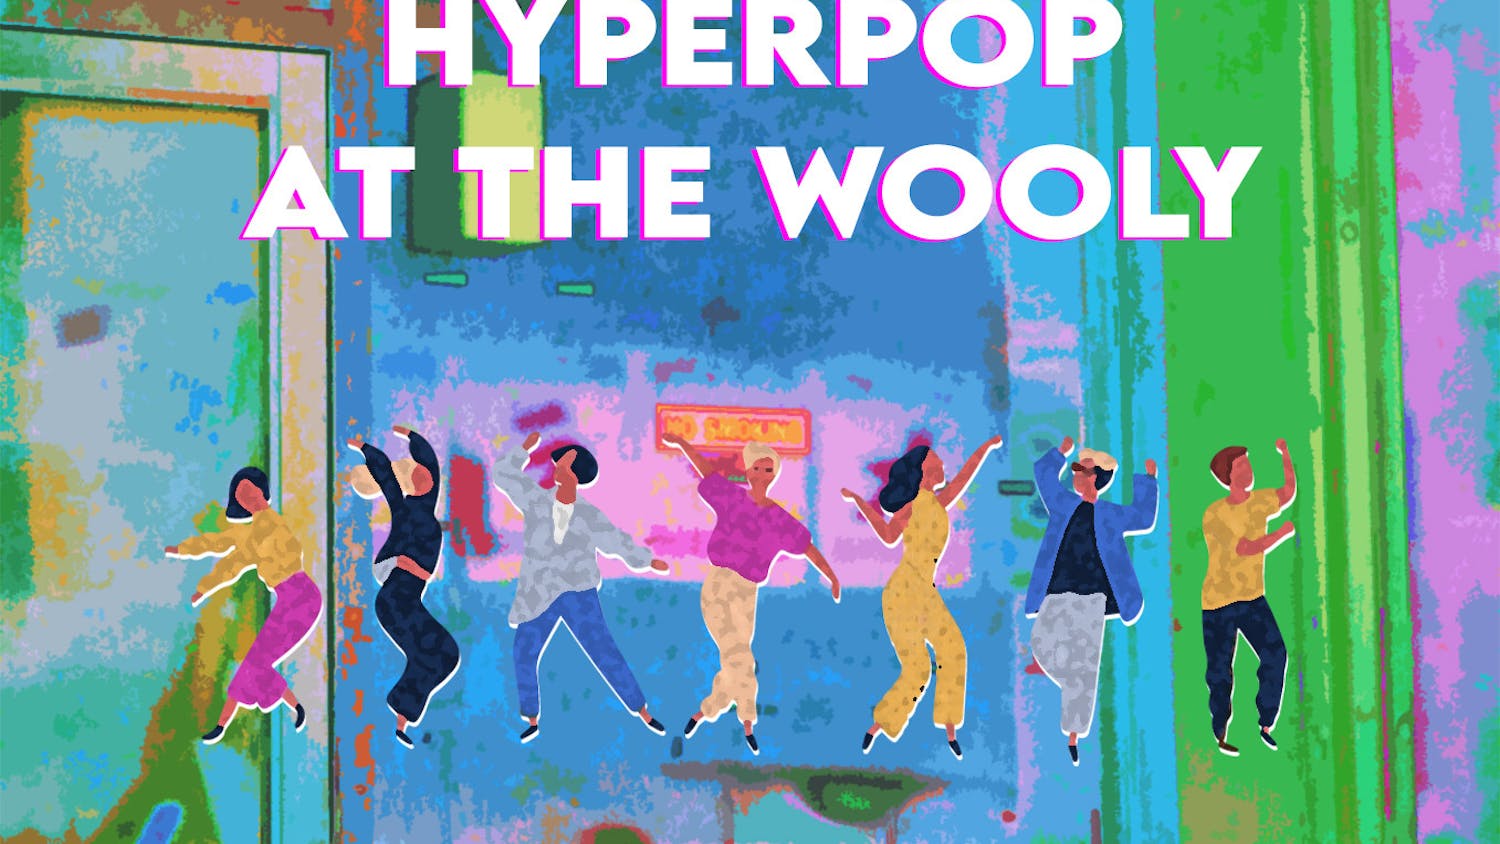 The hyperpop-themed night on Nov. 20 is The Wooly&#x27;s second, following a SOPHIE tribute night Oct. 15.